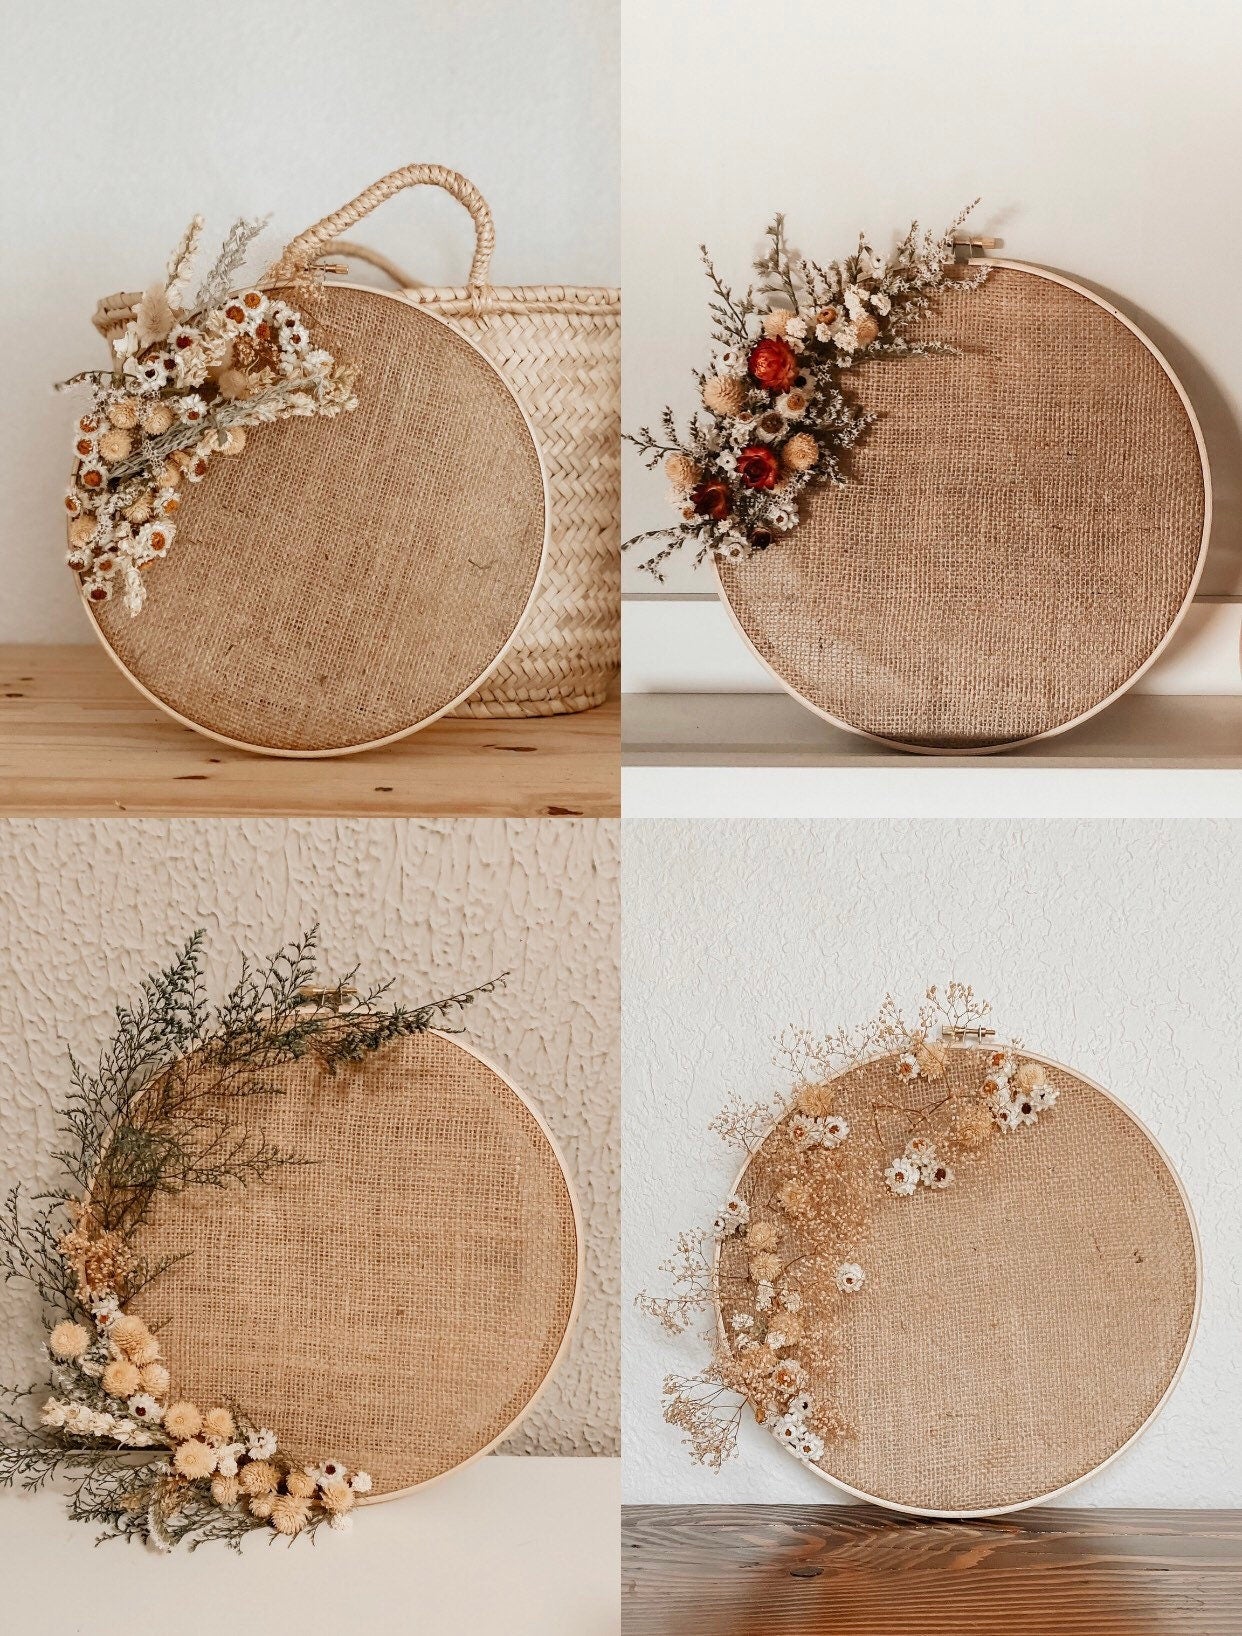 DIY Wreath Kit, Christmas Project, Dried Flowers, Mothers Day gift, Arts and Crafts, Embroidery Hoop, Colorful Decoration, Burlap, Gift